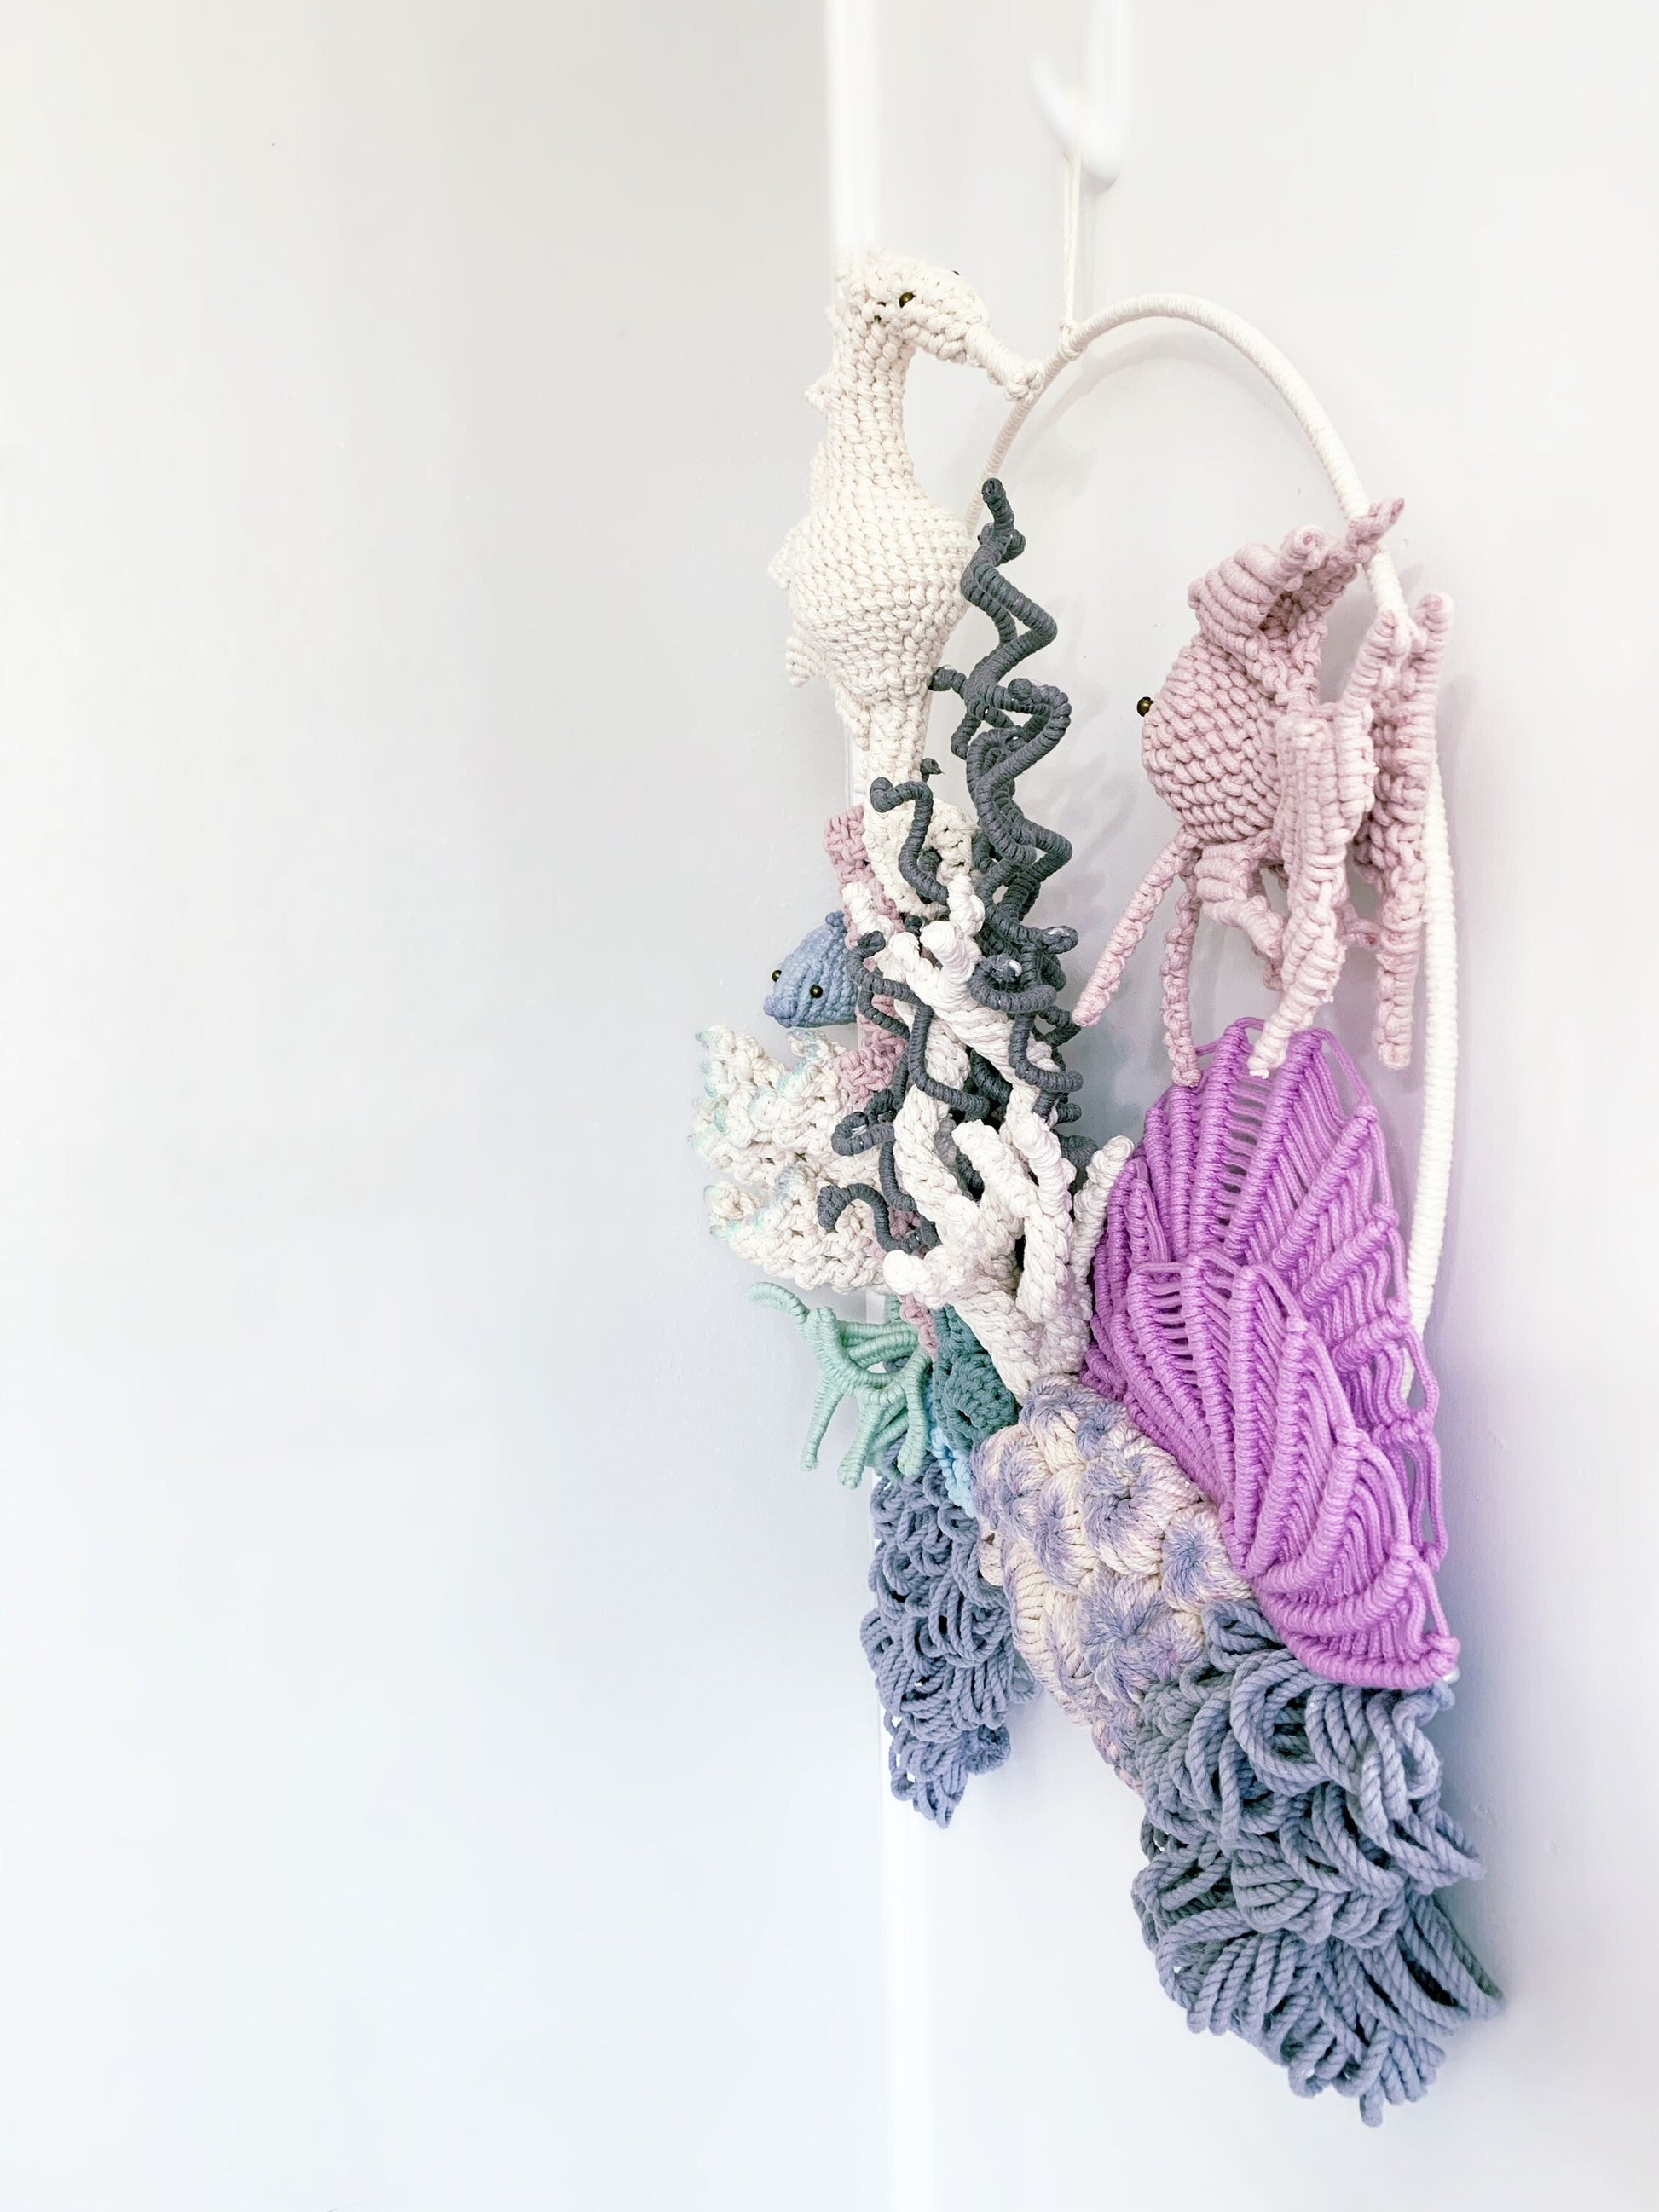 COMMISSION ONLY ART// Commission order only/Seahorse wall Decor/Coral reef art/macrame ocean art/Nautical wall art/fish art/Macrame Animal/